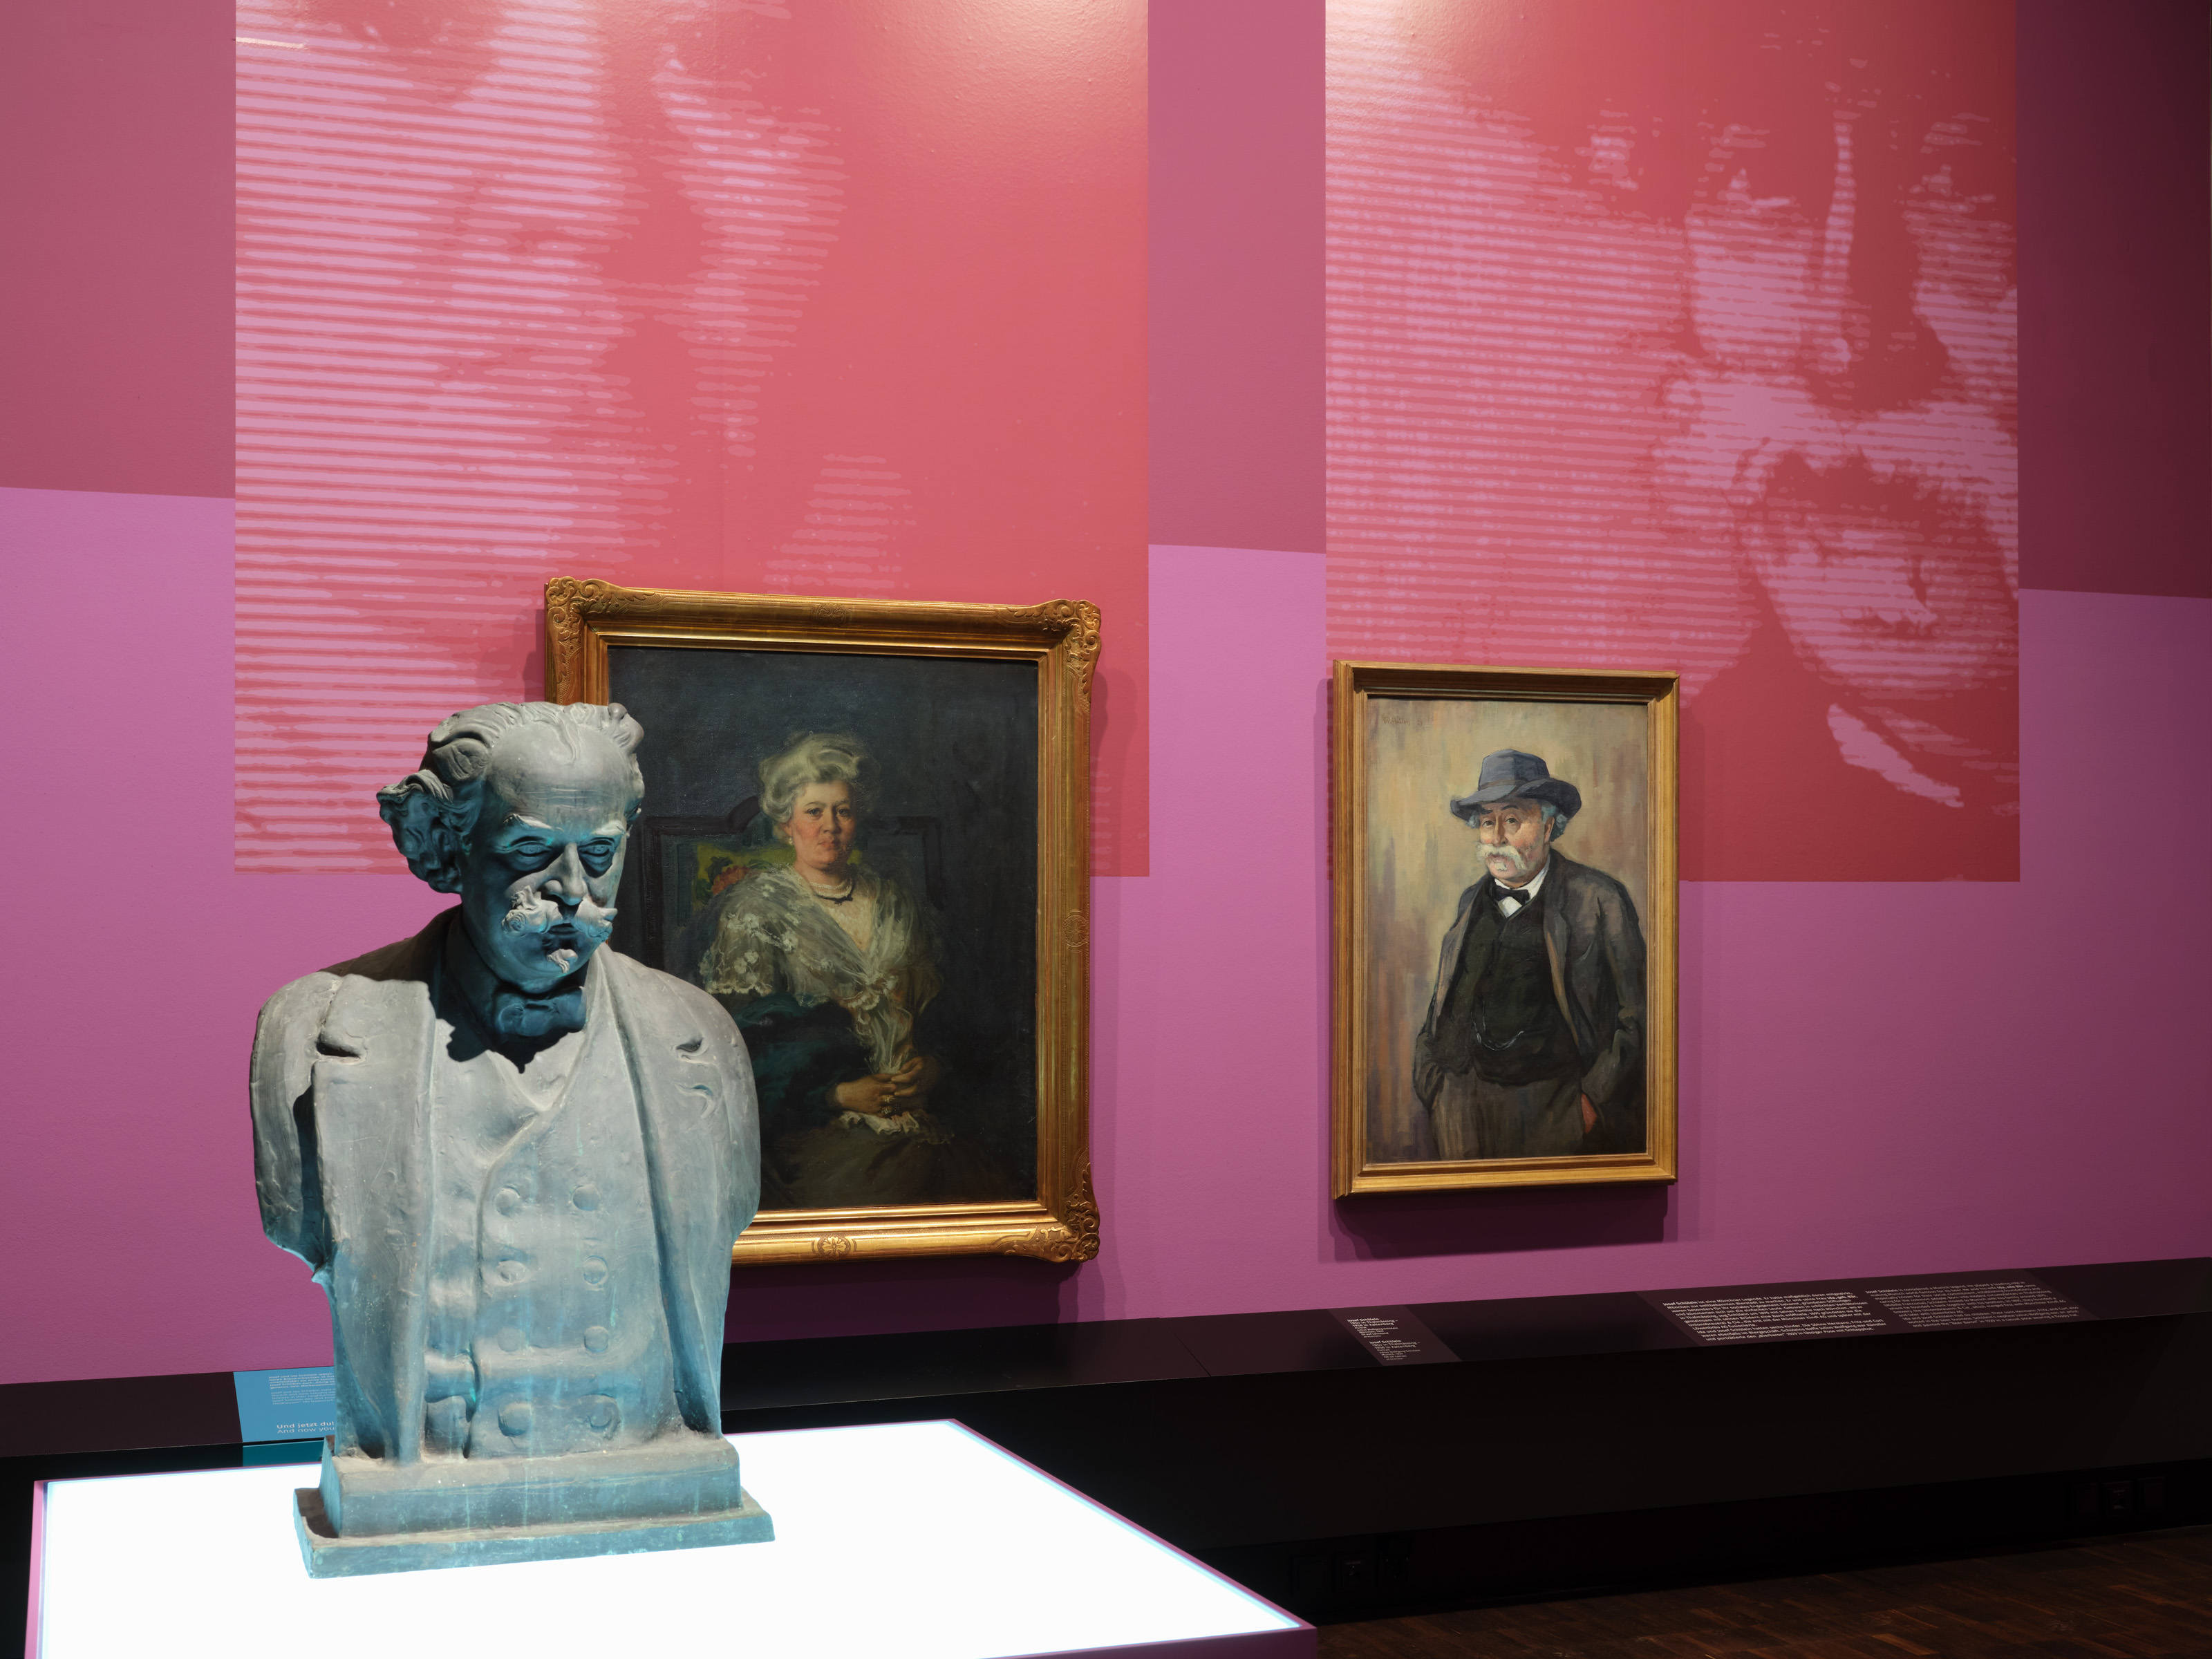 Exhibition view "Picture Stories. Portraits of Munich Jews" - a bust in the foreground and two portraits in the background hang side by side in an exhibition room in shades of pink, large blow-ups reflect the motif of the portraits, photo: Eva Jünger / Jewish Museum Munich